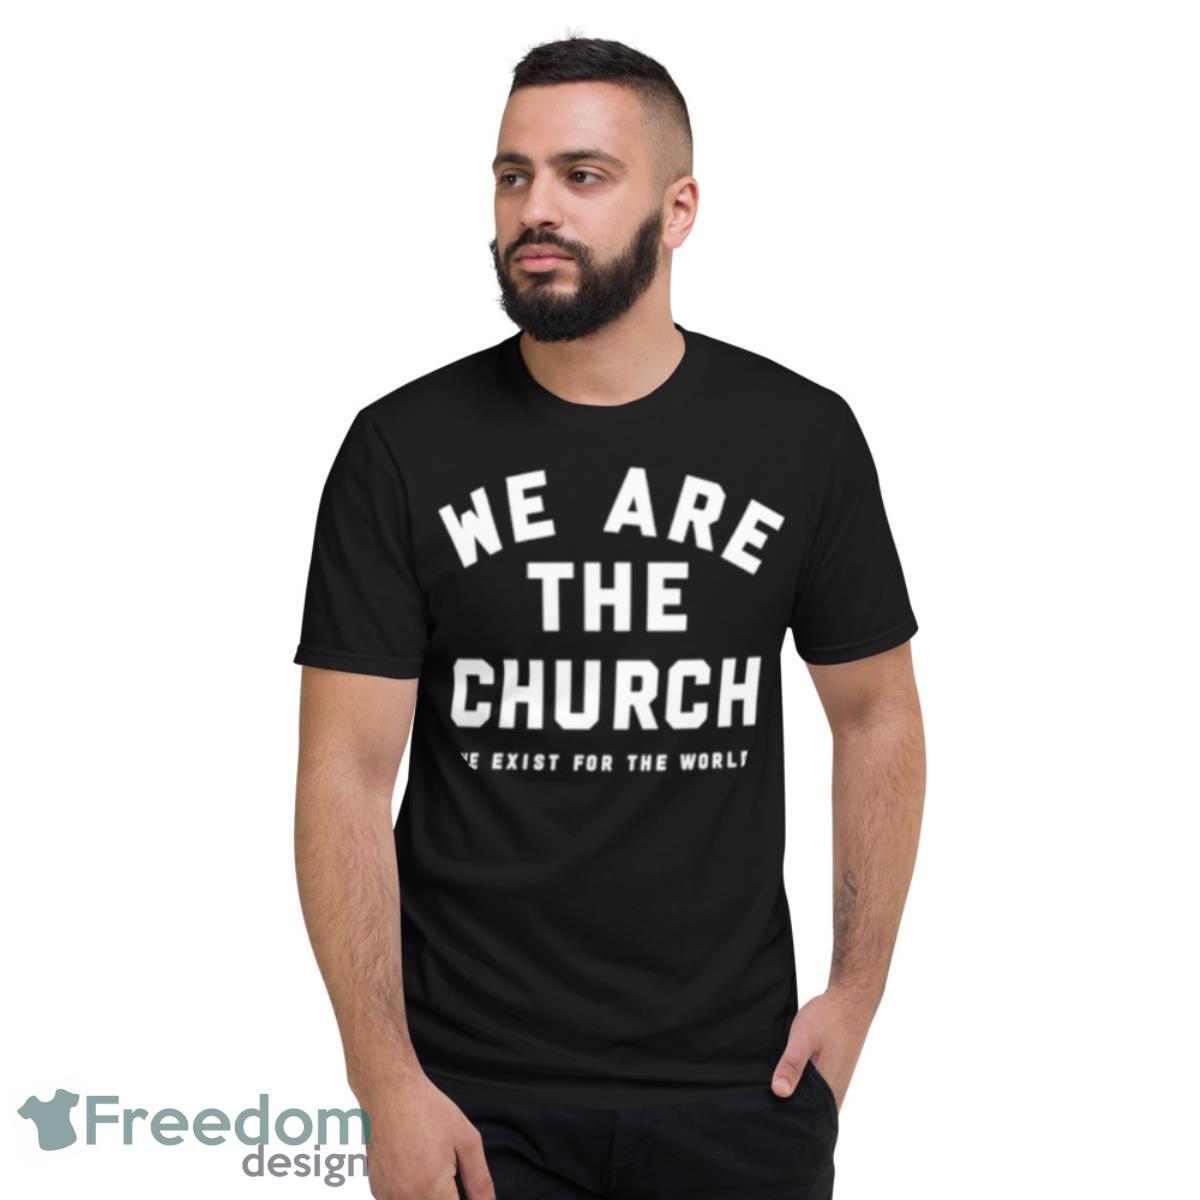 We Are The Church We Exist For The World Shirt